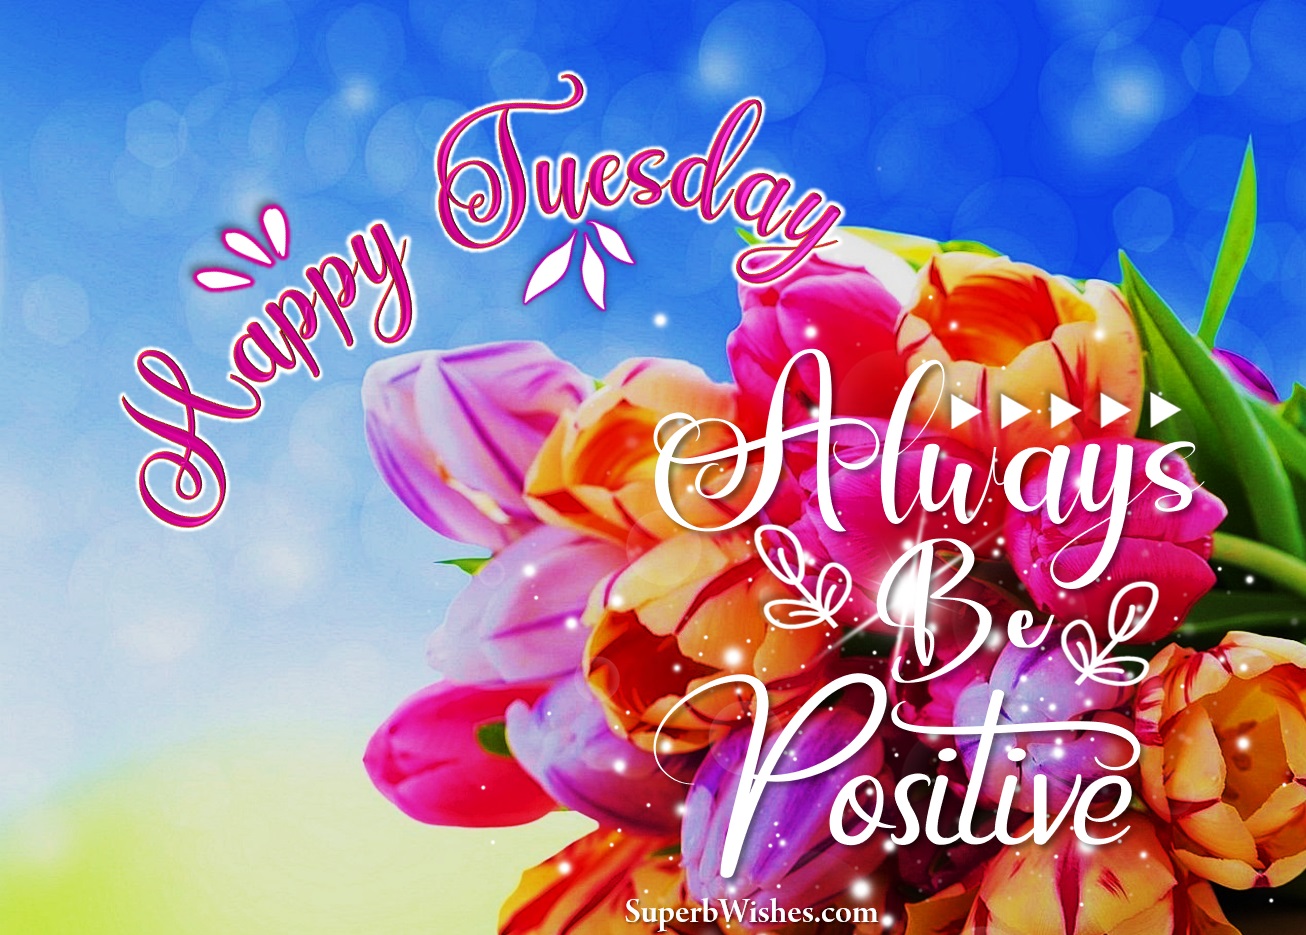 Positive Happy Tuesday quotes. Superbwishes.com